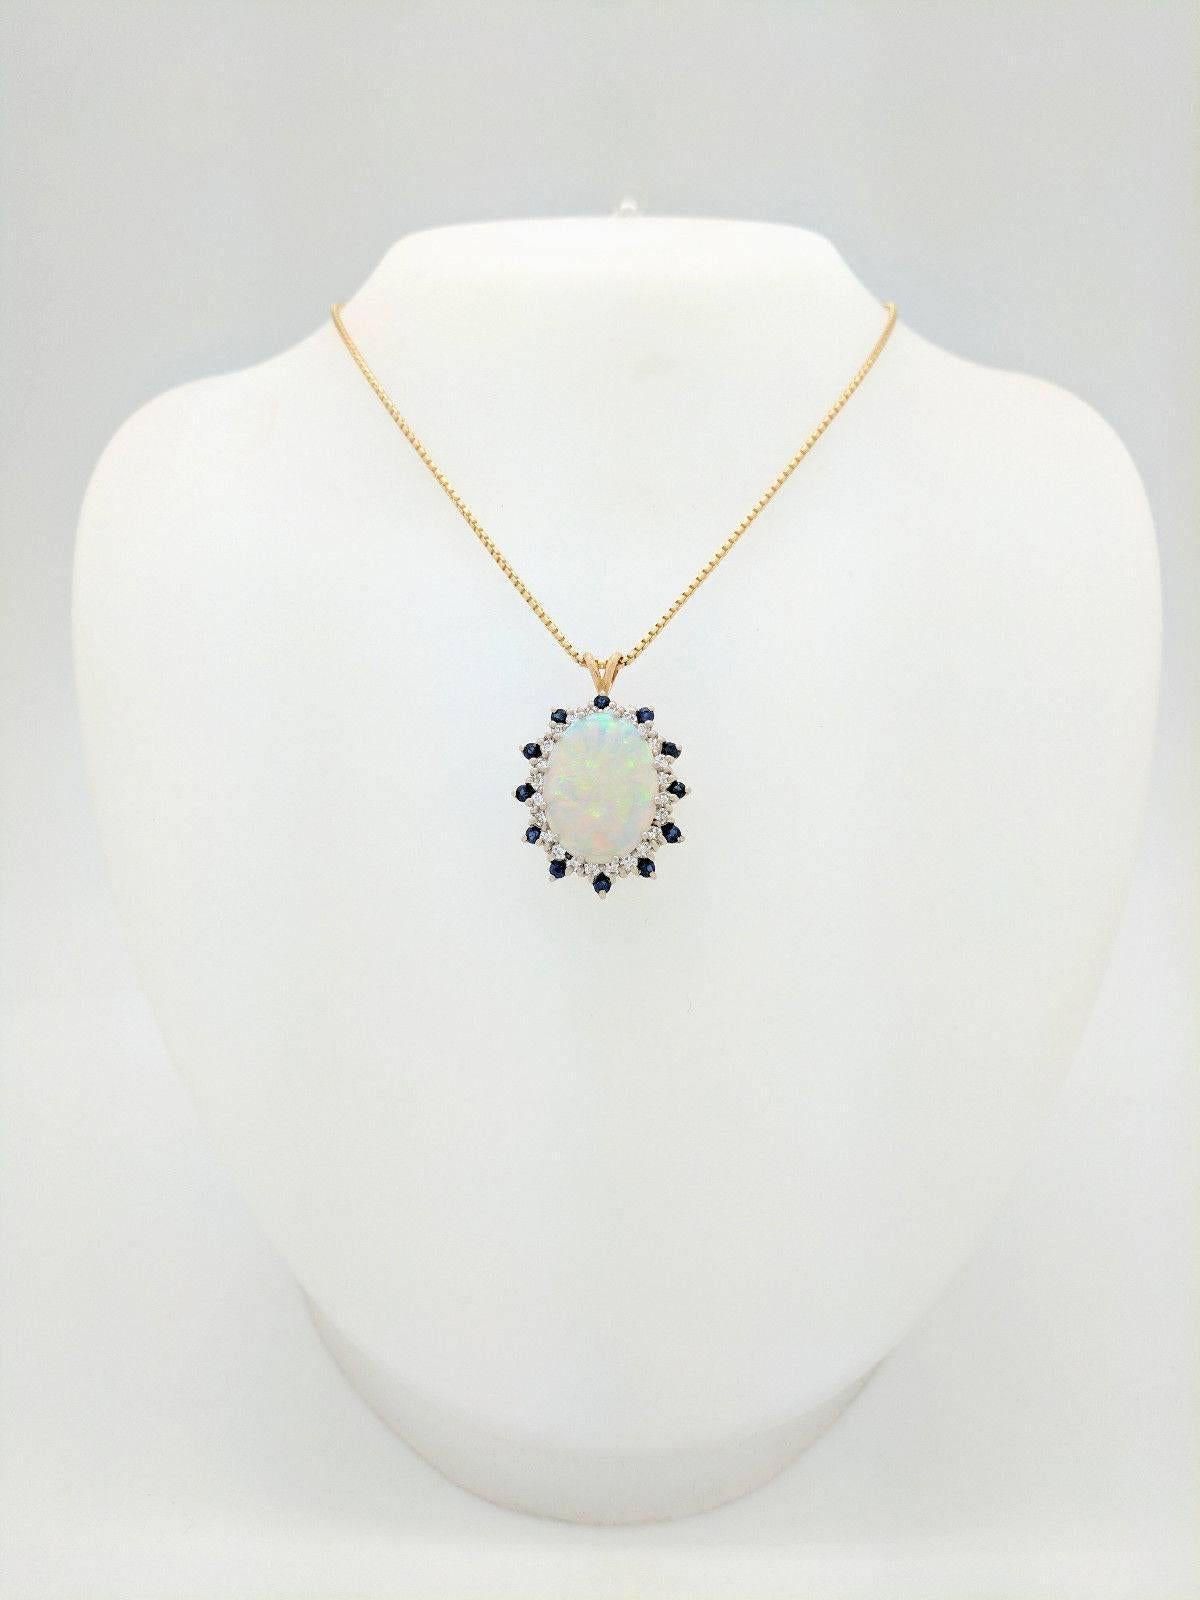 You are viewing a stunning Ladies Estate Australian Opal, Sapphire and Diamond Pendant Necklace. This pendant necklace is crafted from 14k yellow gold and weighs 14.6 grams. It features one 20.5mm x 15.5mm oval shaped Australian opal, twelve .10ct